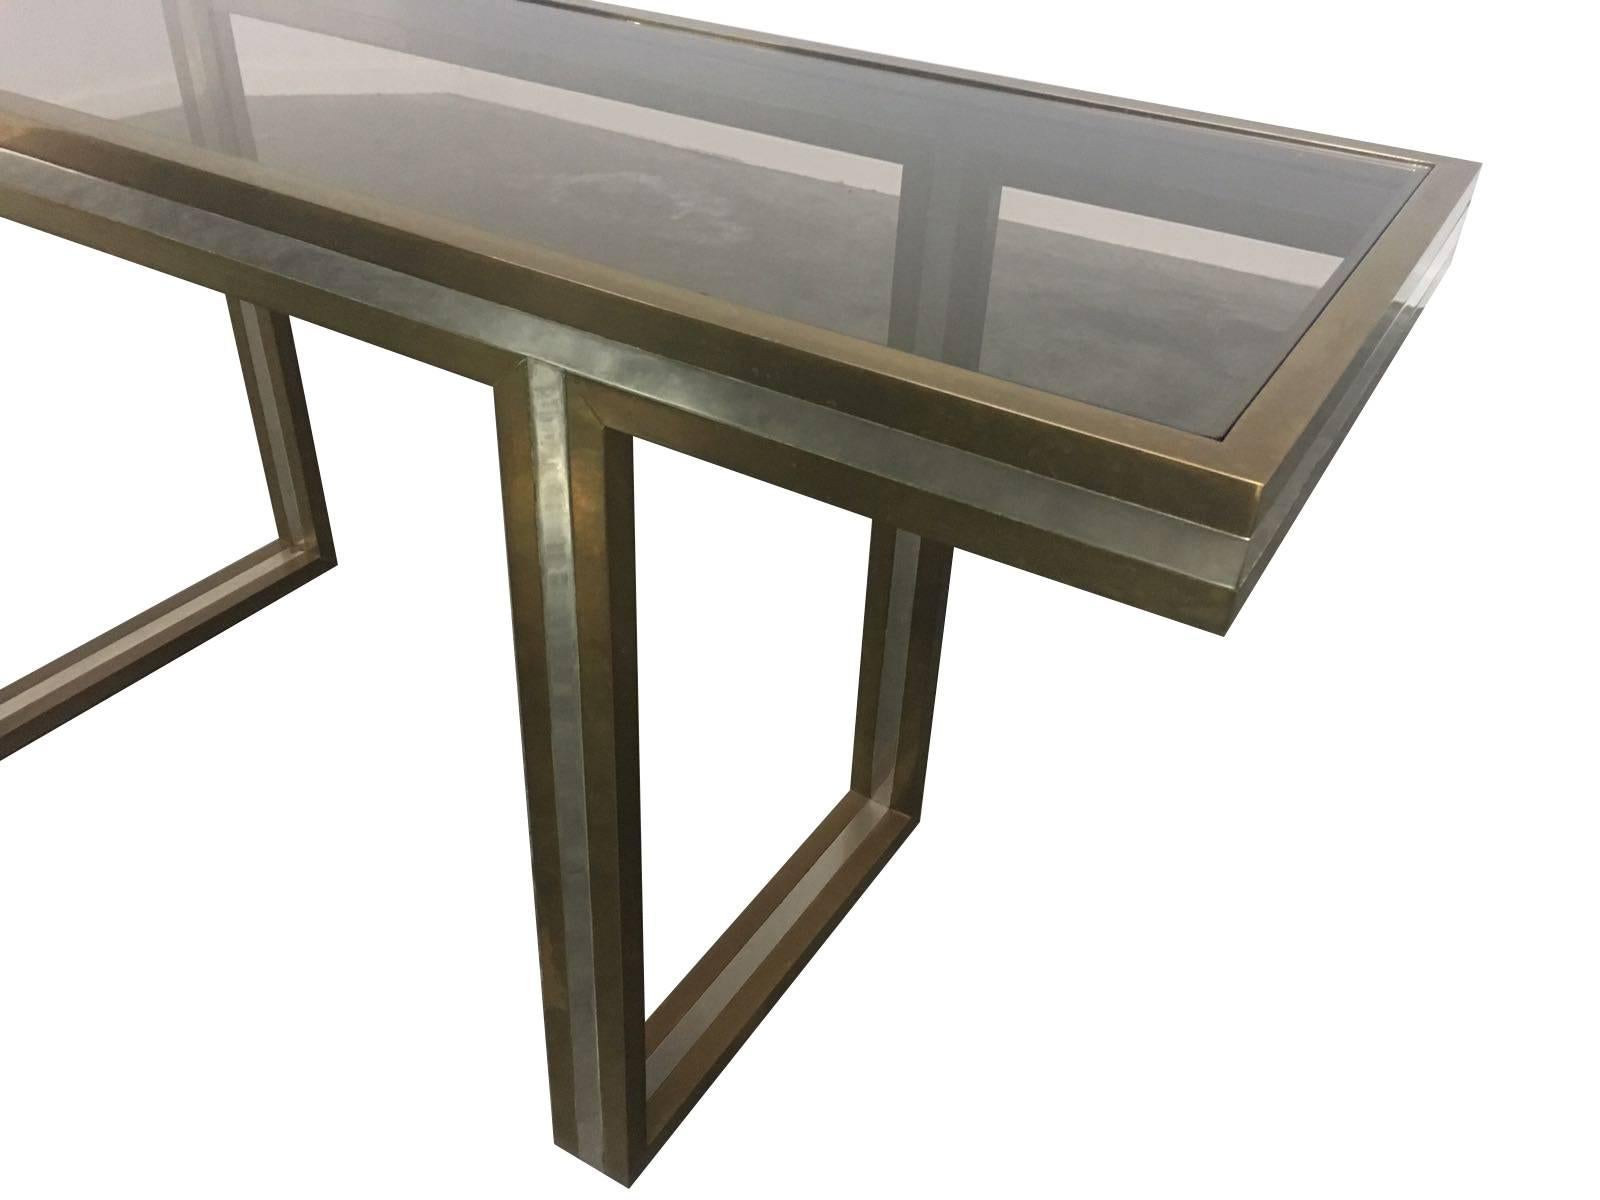 A Romeo Rega brass and chrome console table, with smoked glass top. The brass has original patina so could be polished up if required. Also see matching large coffee table too.